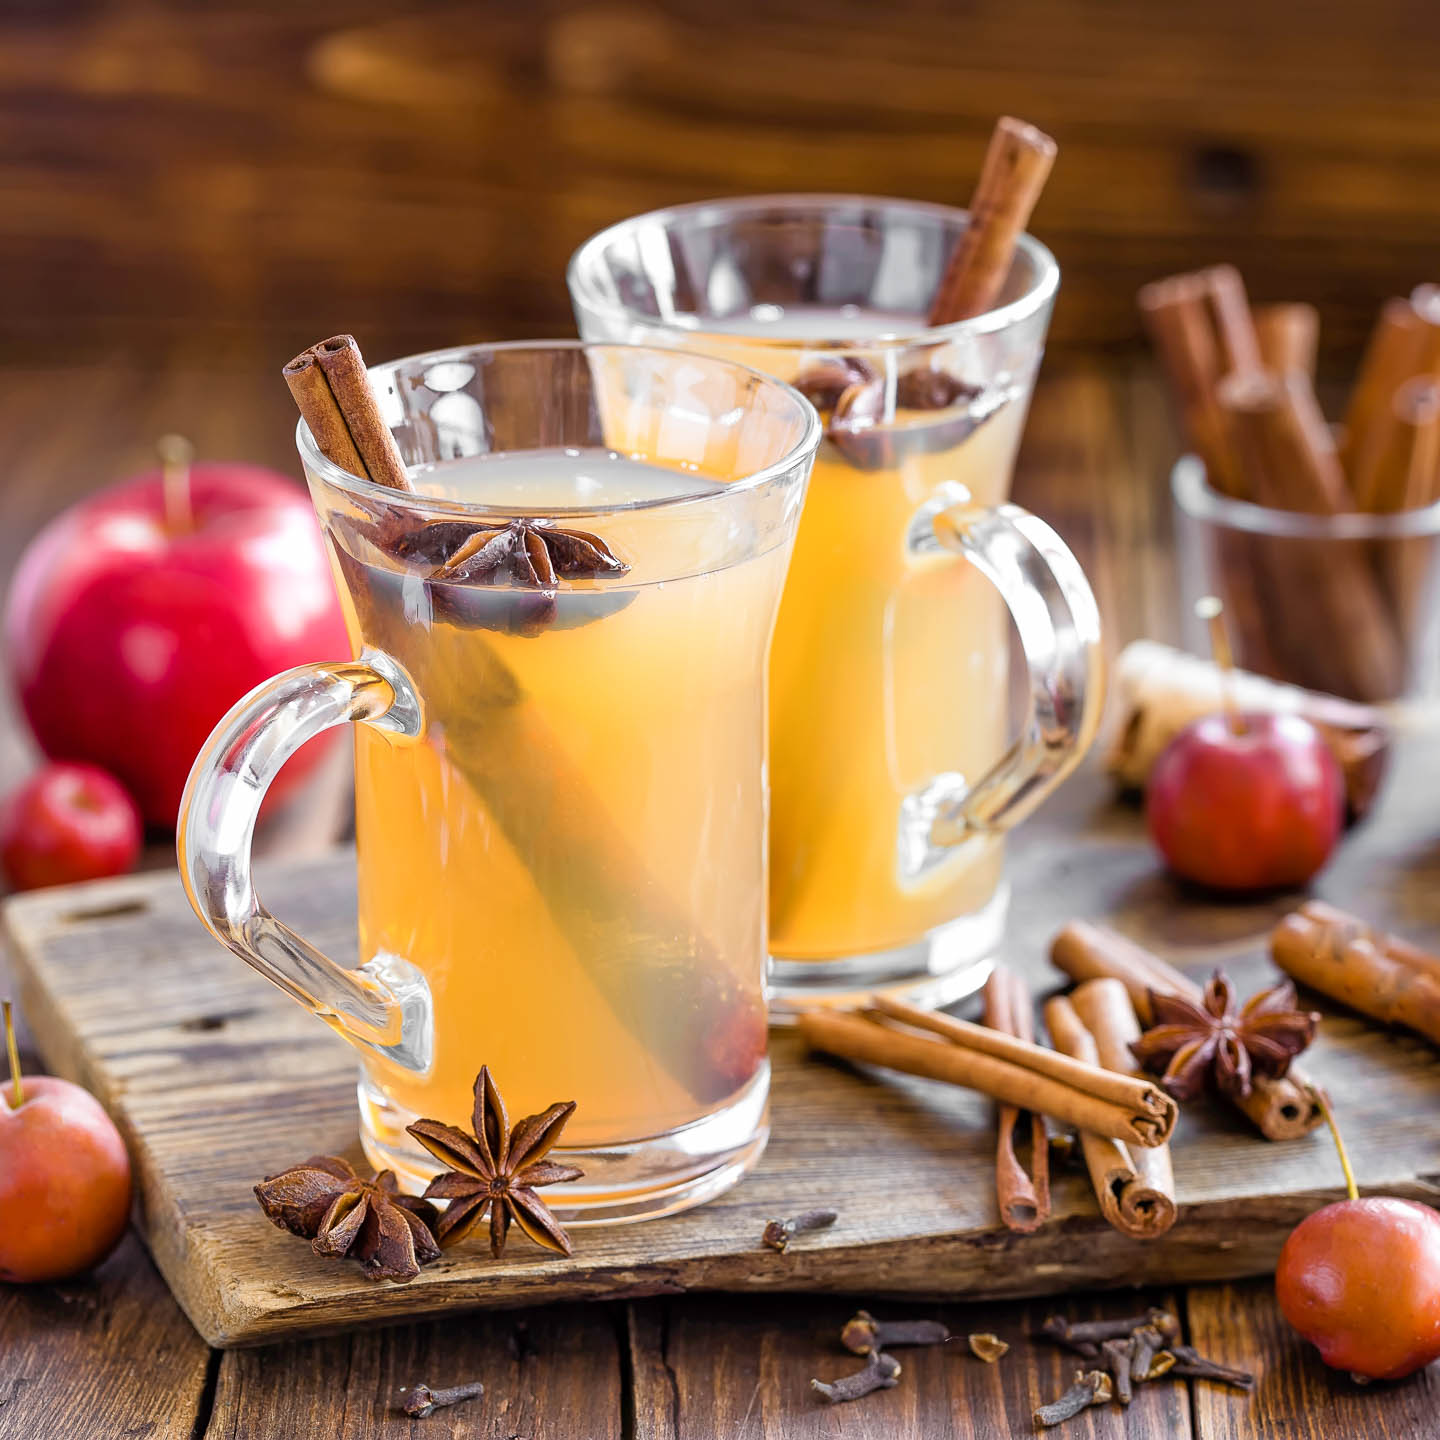 spiced apple cider in glasses with cinnamon sticks and star anise garnish